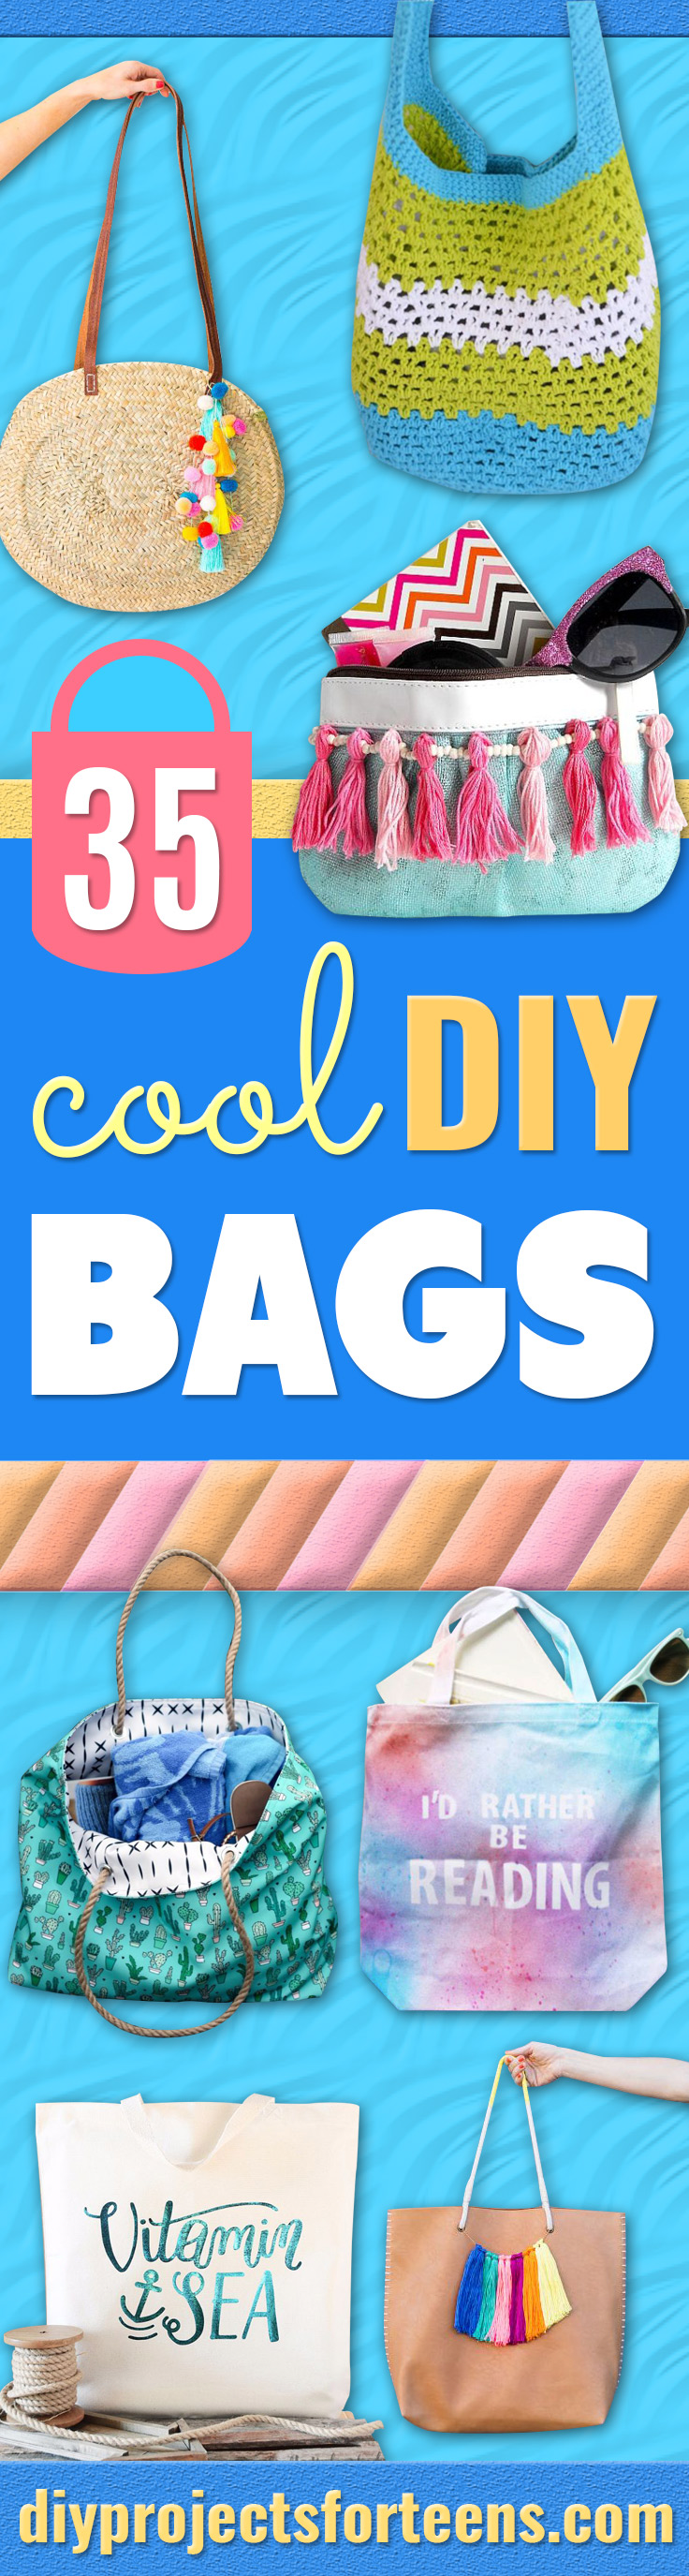 DIY Bags for Summer - Easy Ideas to Make for Beach and Pool - Quick Projects for a Bag on A Budget - Cute No Sew Idea, Quick Sewing Patterns - Paint and Crafts for Making Creative Beach Bags - Fun Tutorials for Kids, Teens, Teenagers, Girls and Adults http://diyprojectsforteens.com/diy-bags-summer